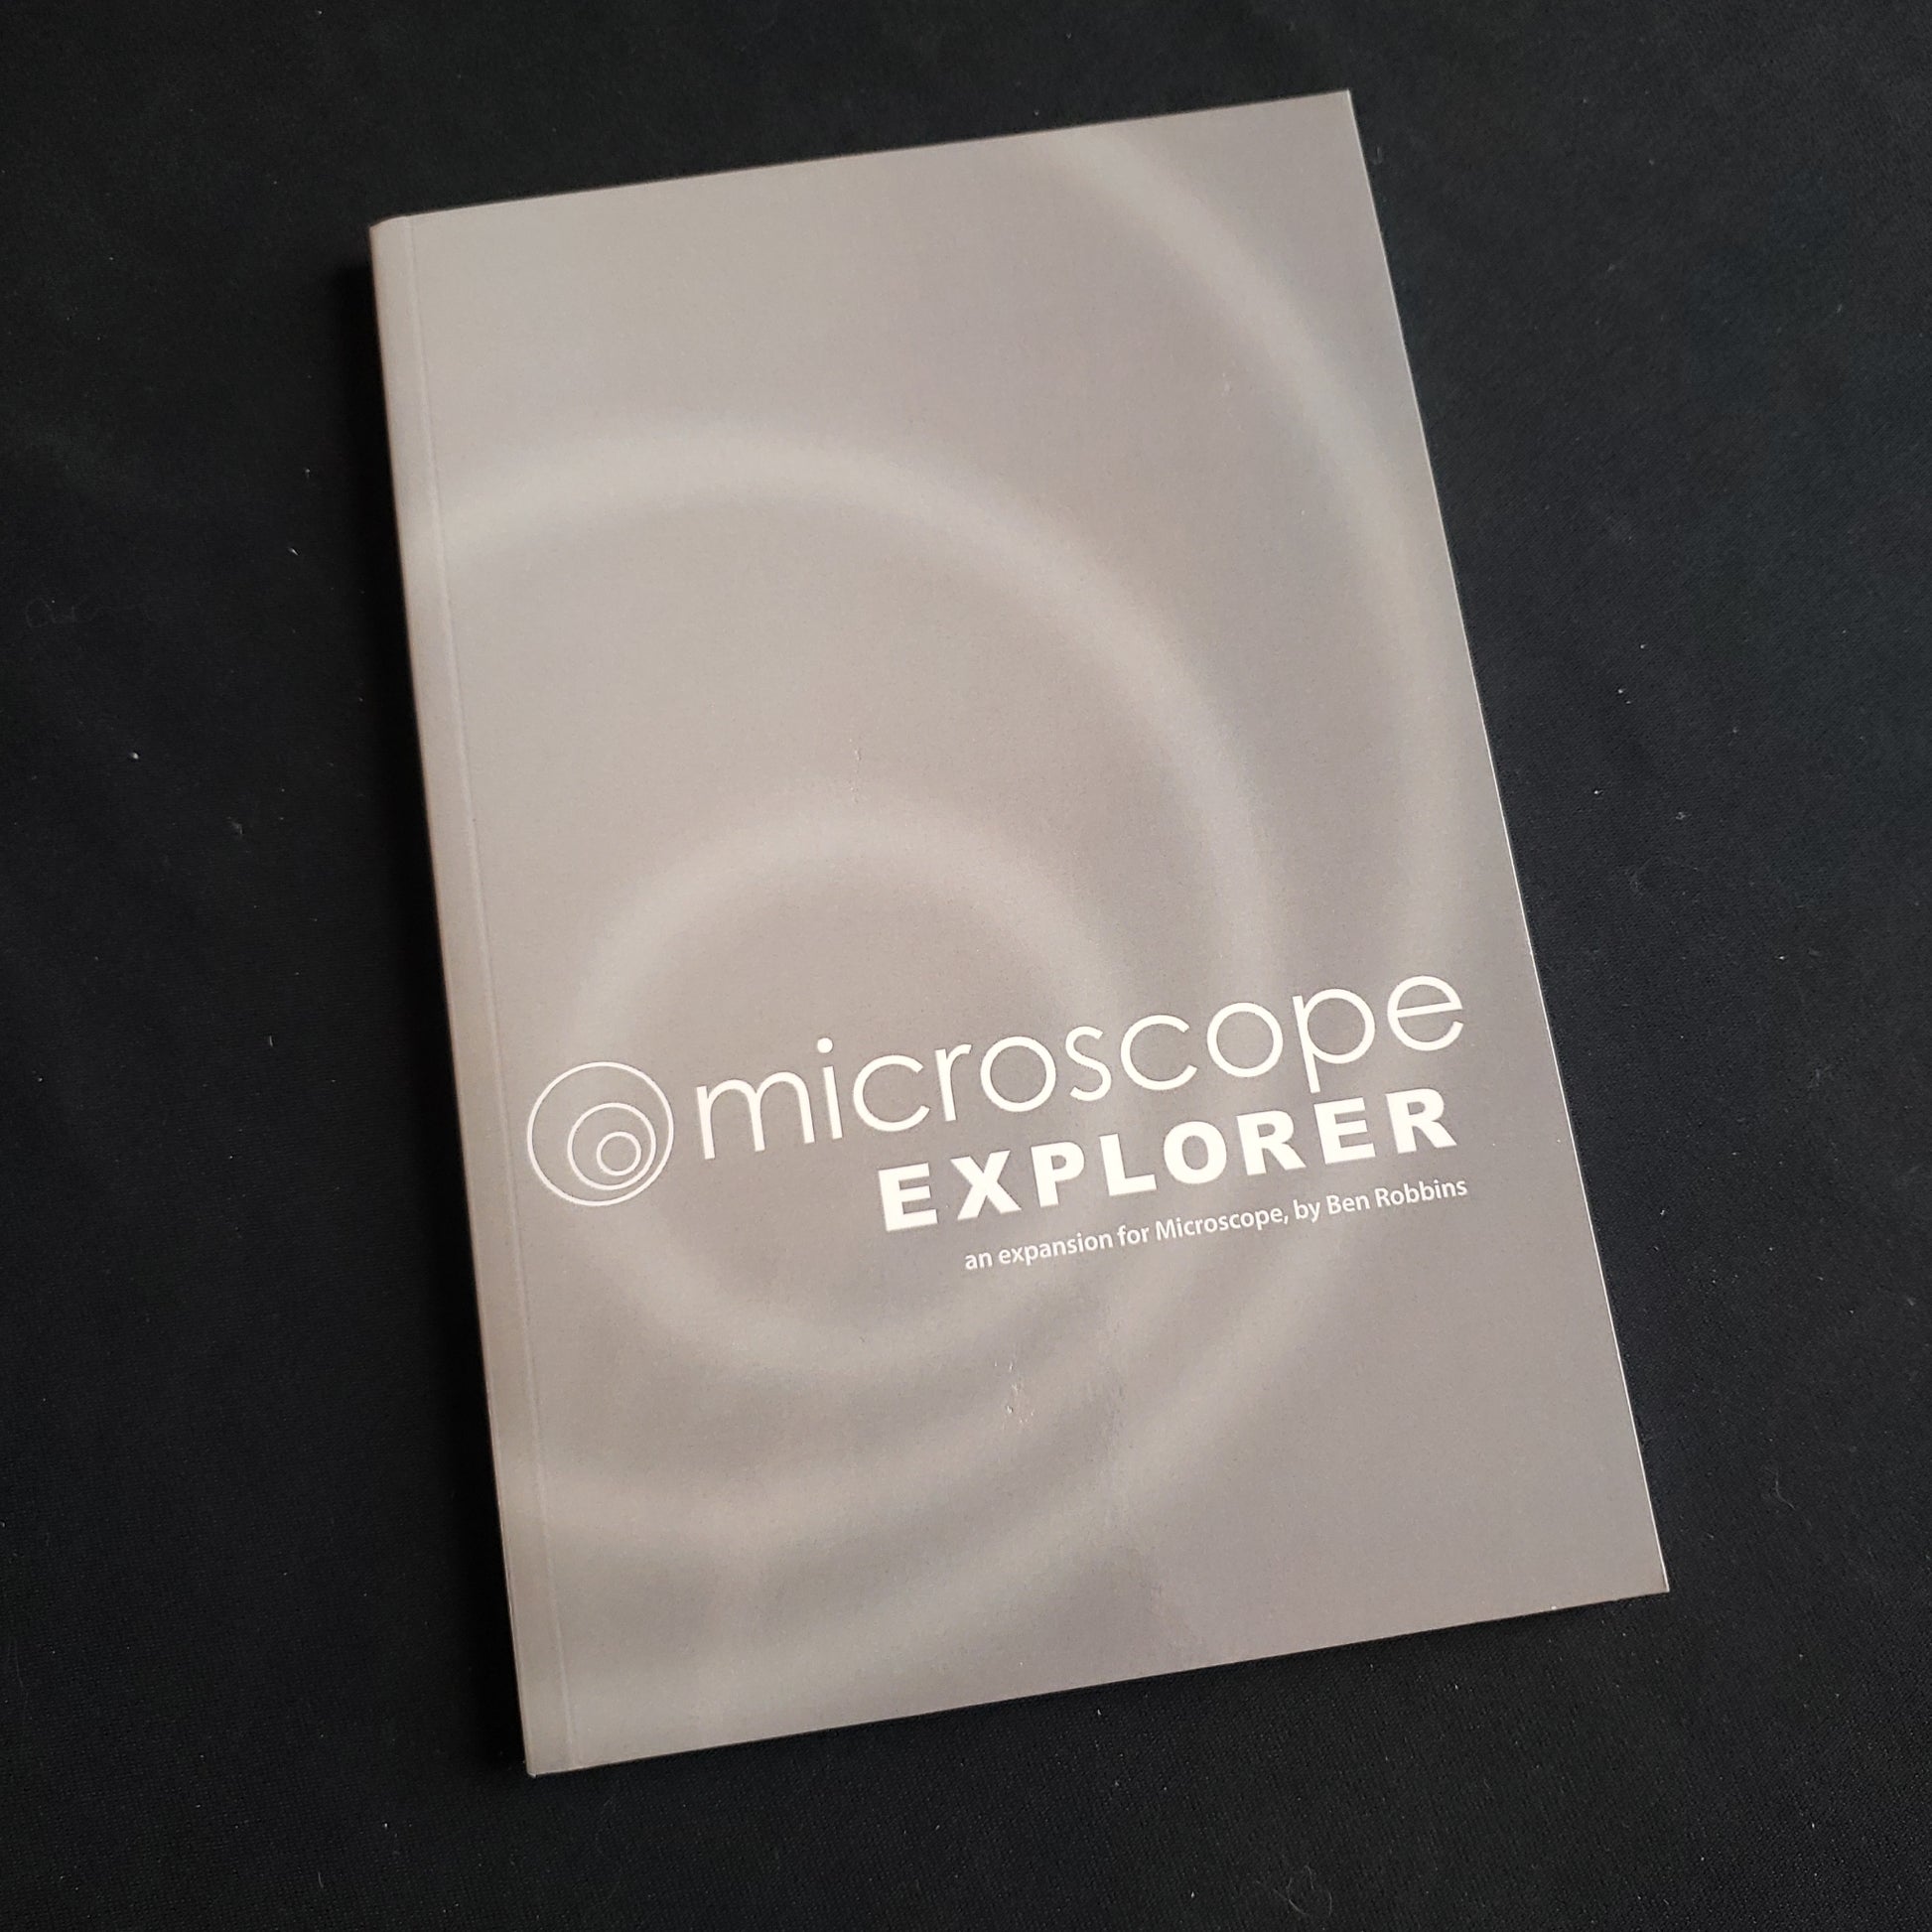 Image shows the front cover of the Microscope Explorer roleplaying game book